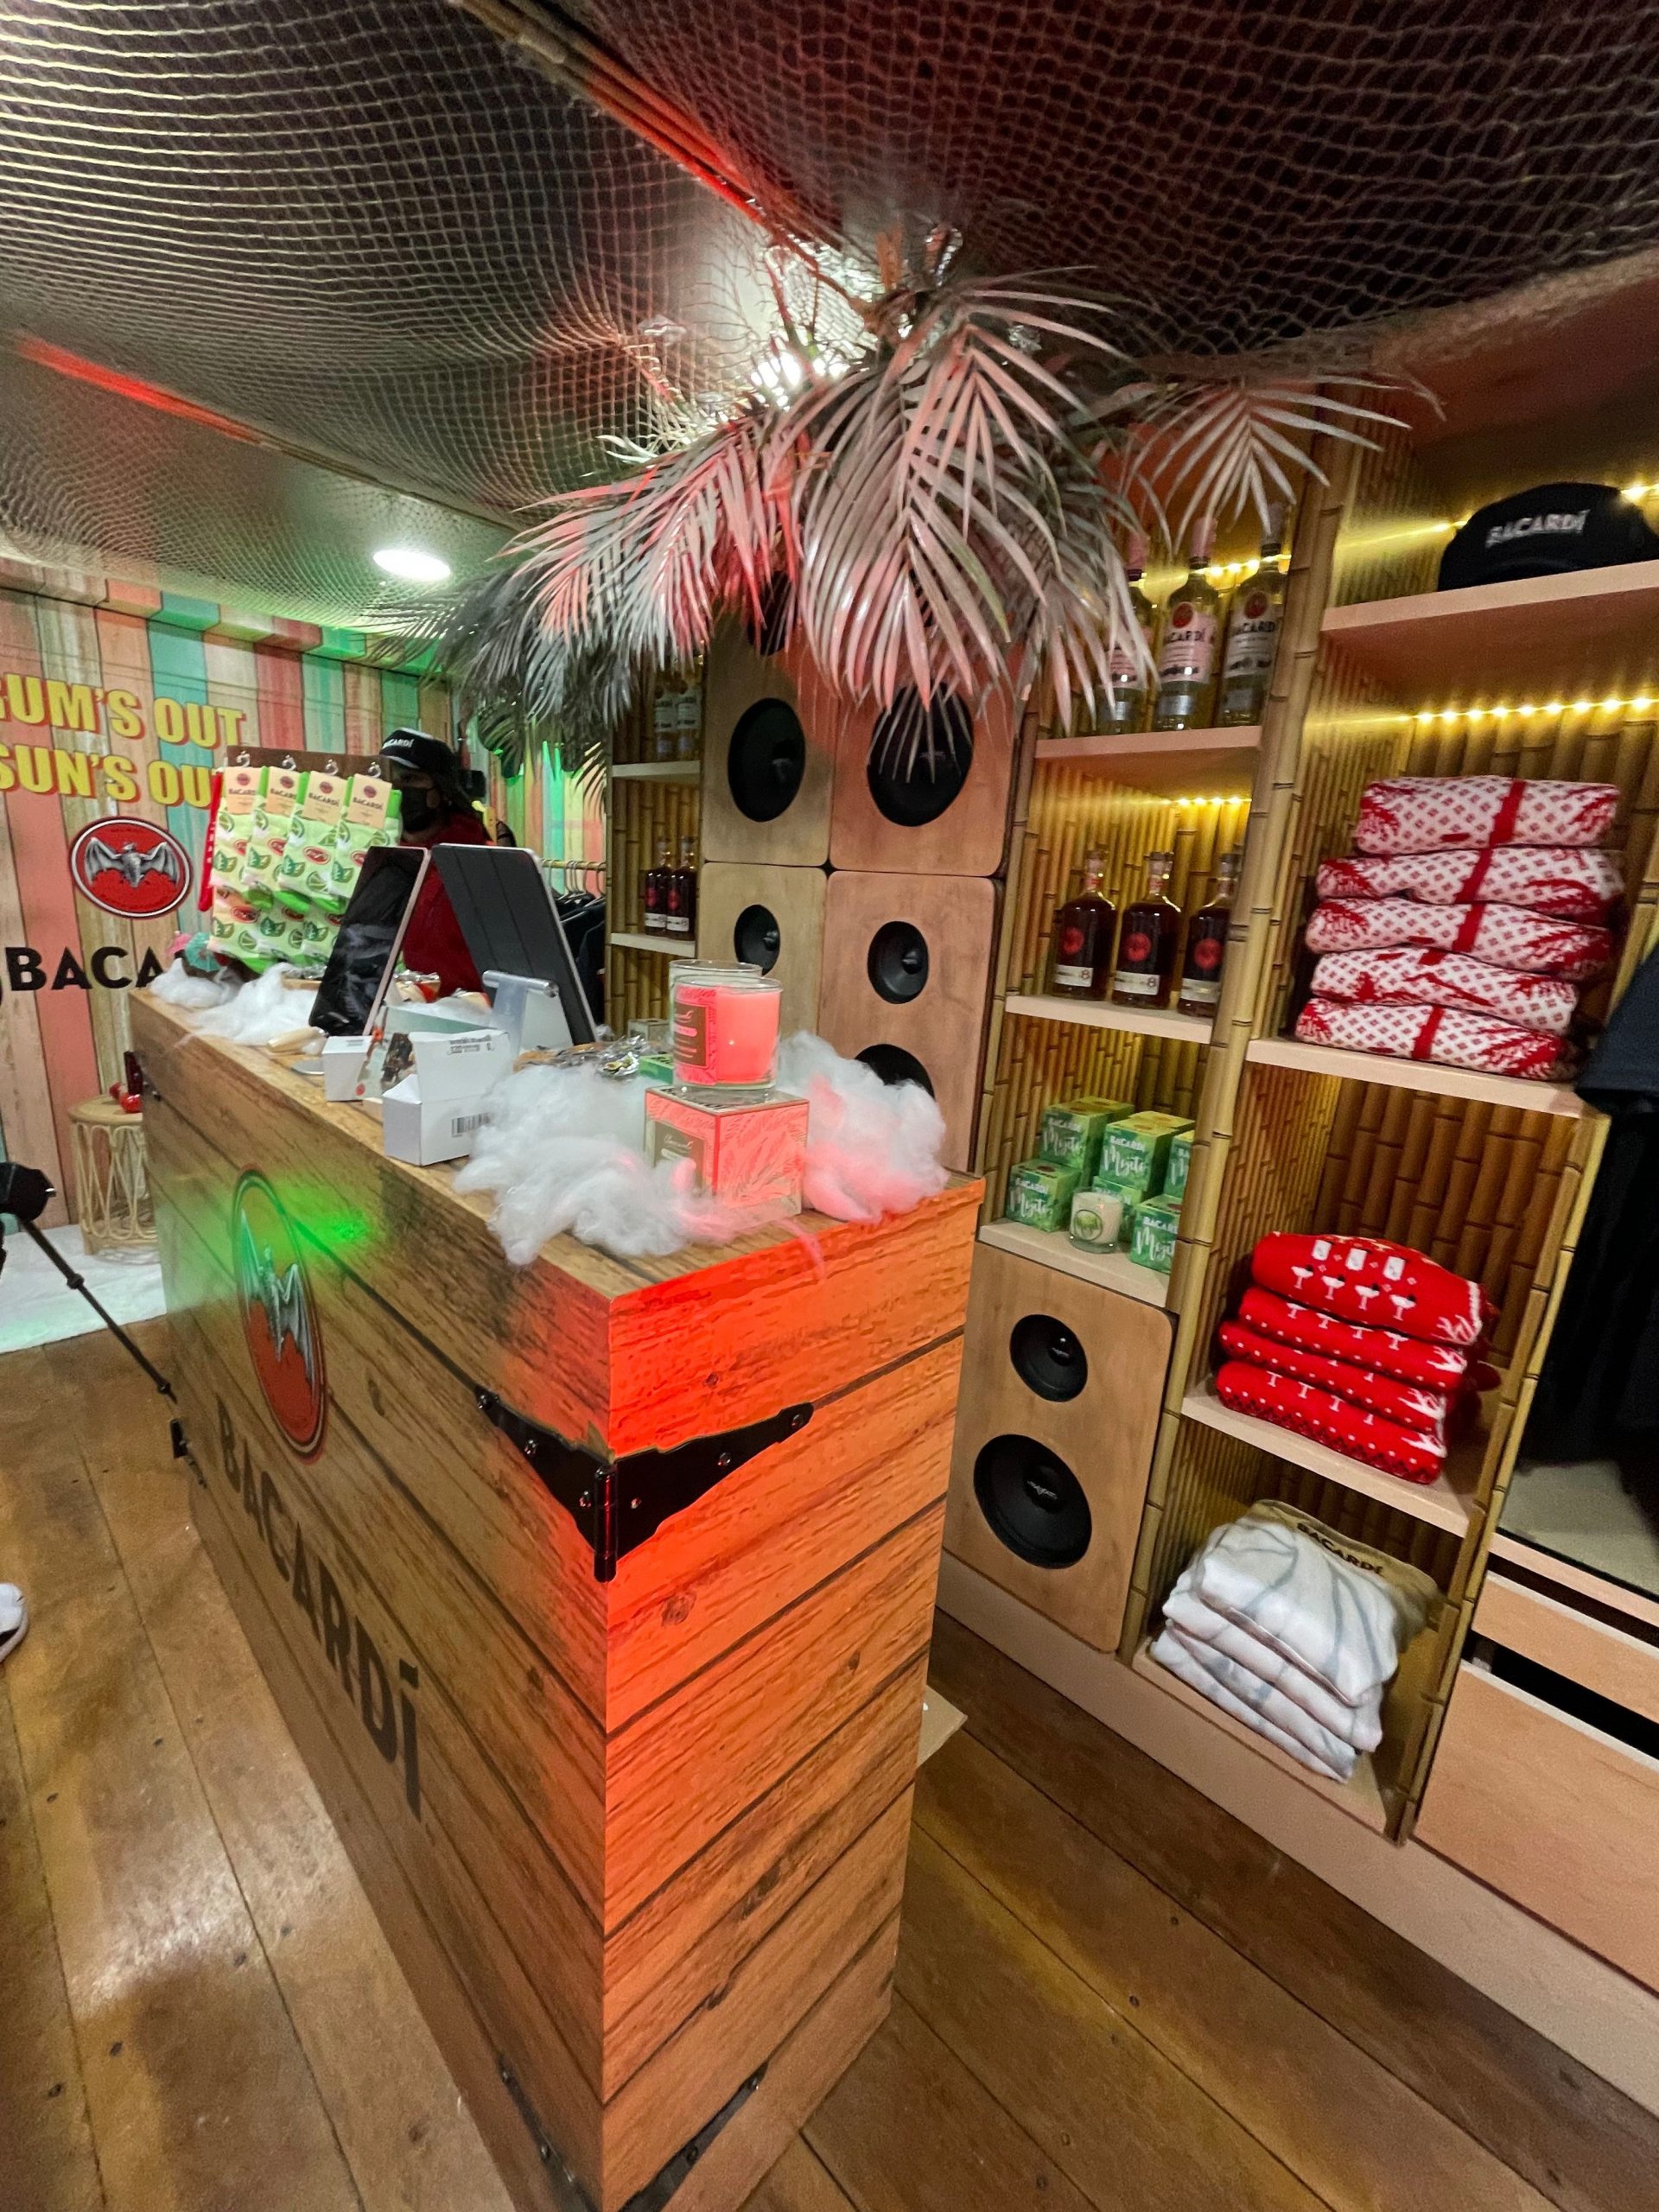 Bacardi Holiday-Themed Pop-Up